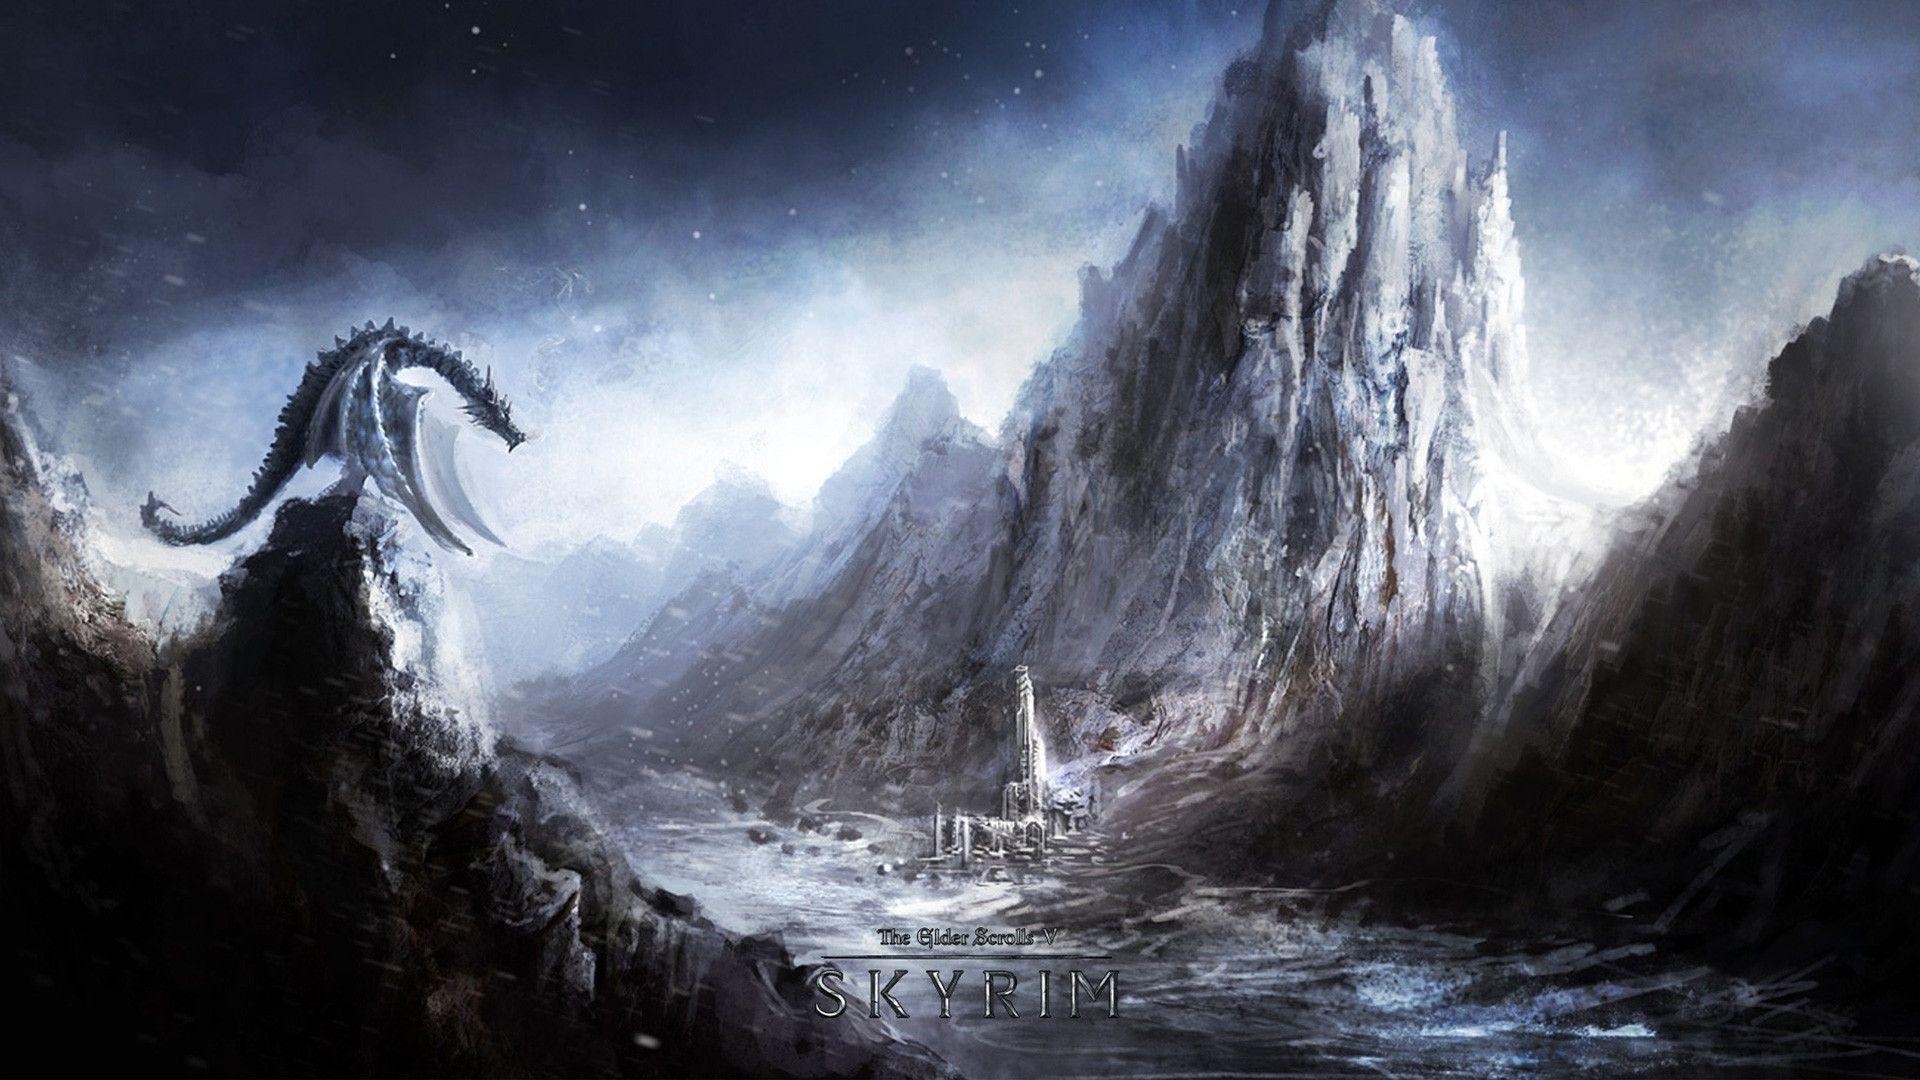 10 Latest Skyrim Wallpaper 1920X1080 Hd FULL HD 1080p For PC Background